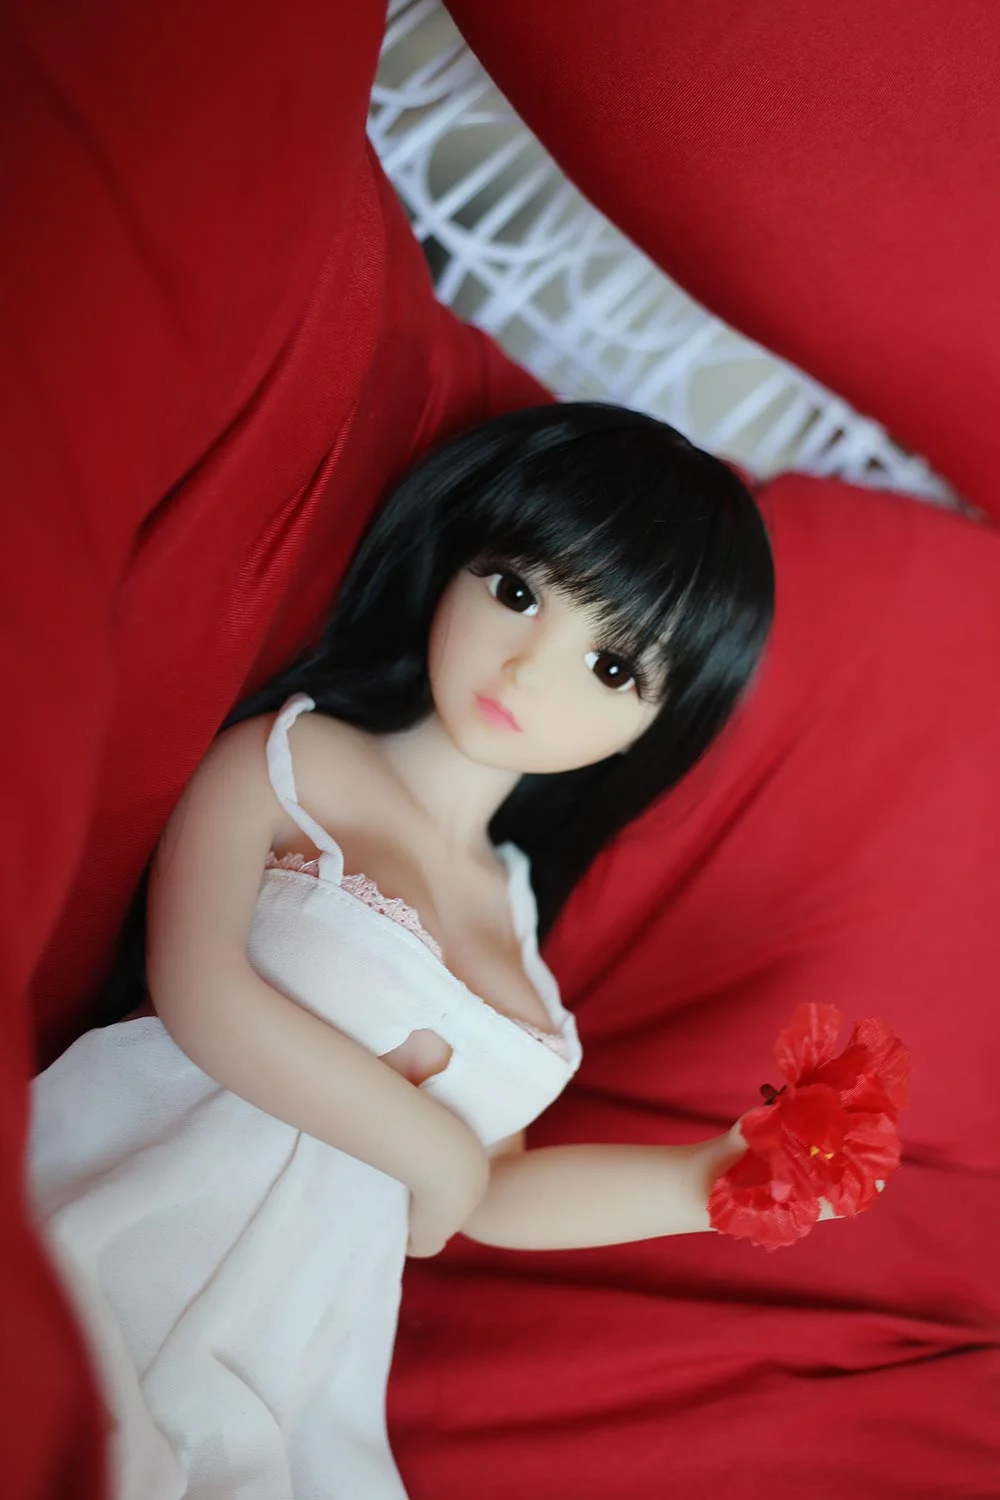 Mini sex doll with black long hair and red flower in hand